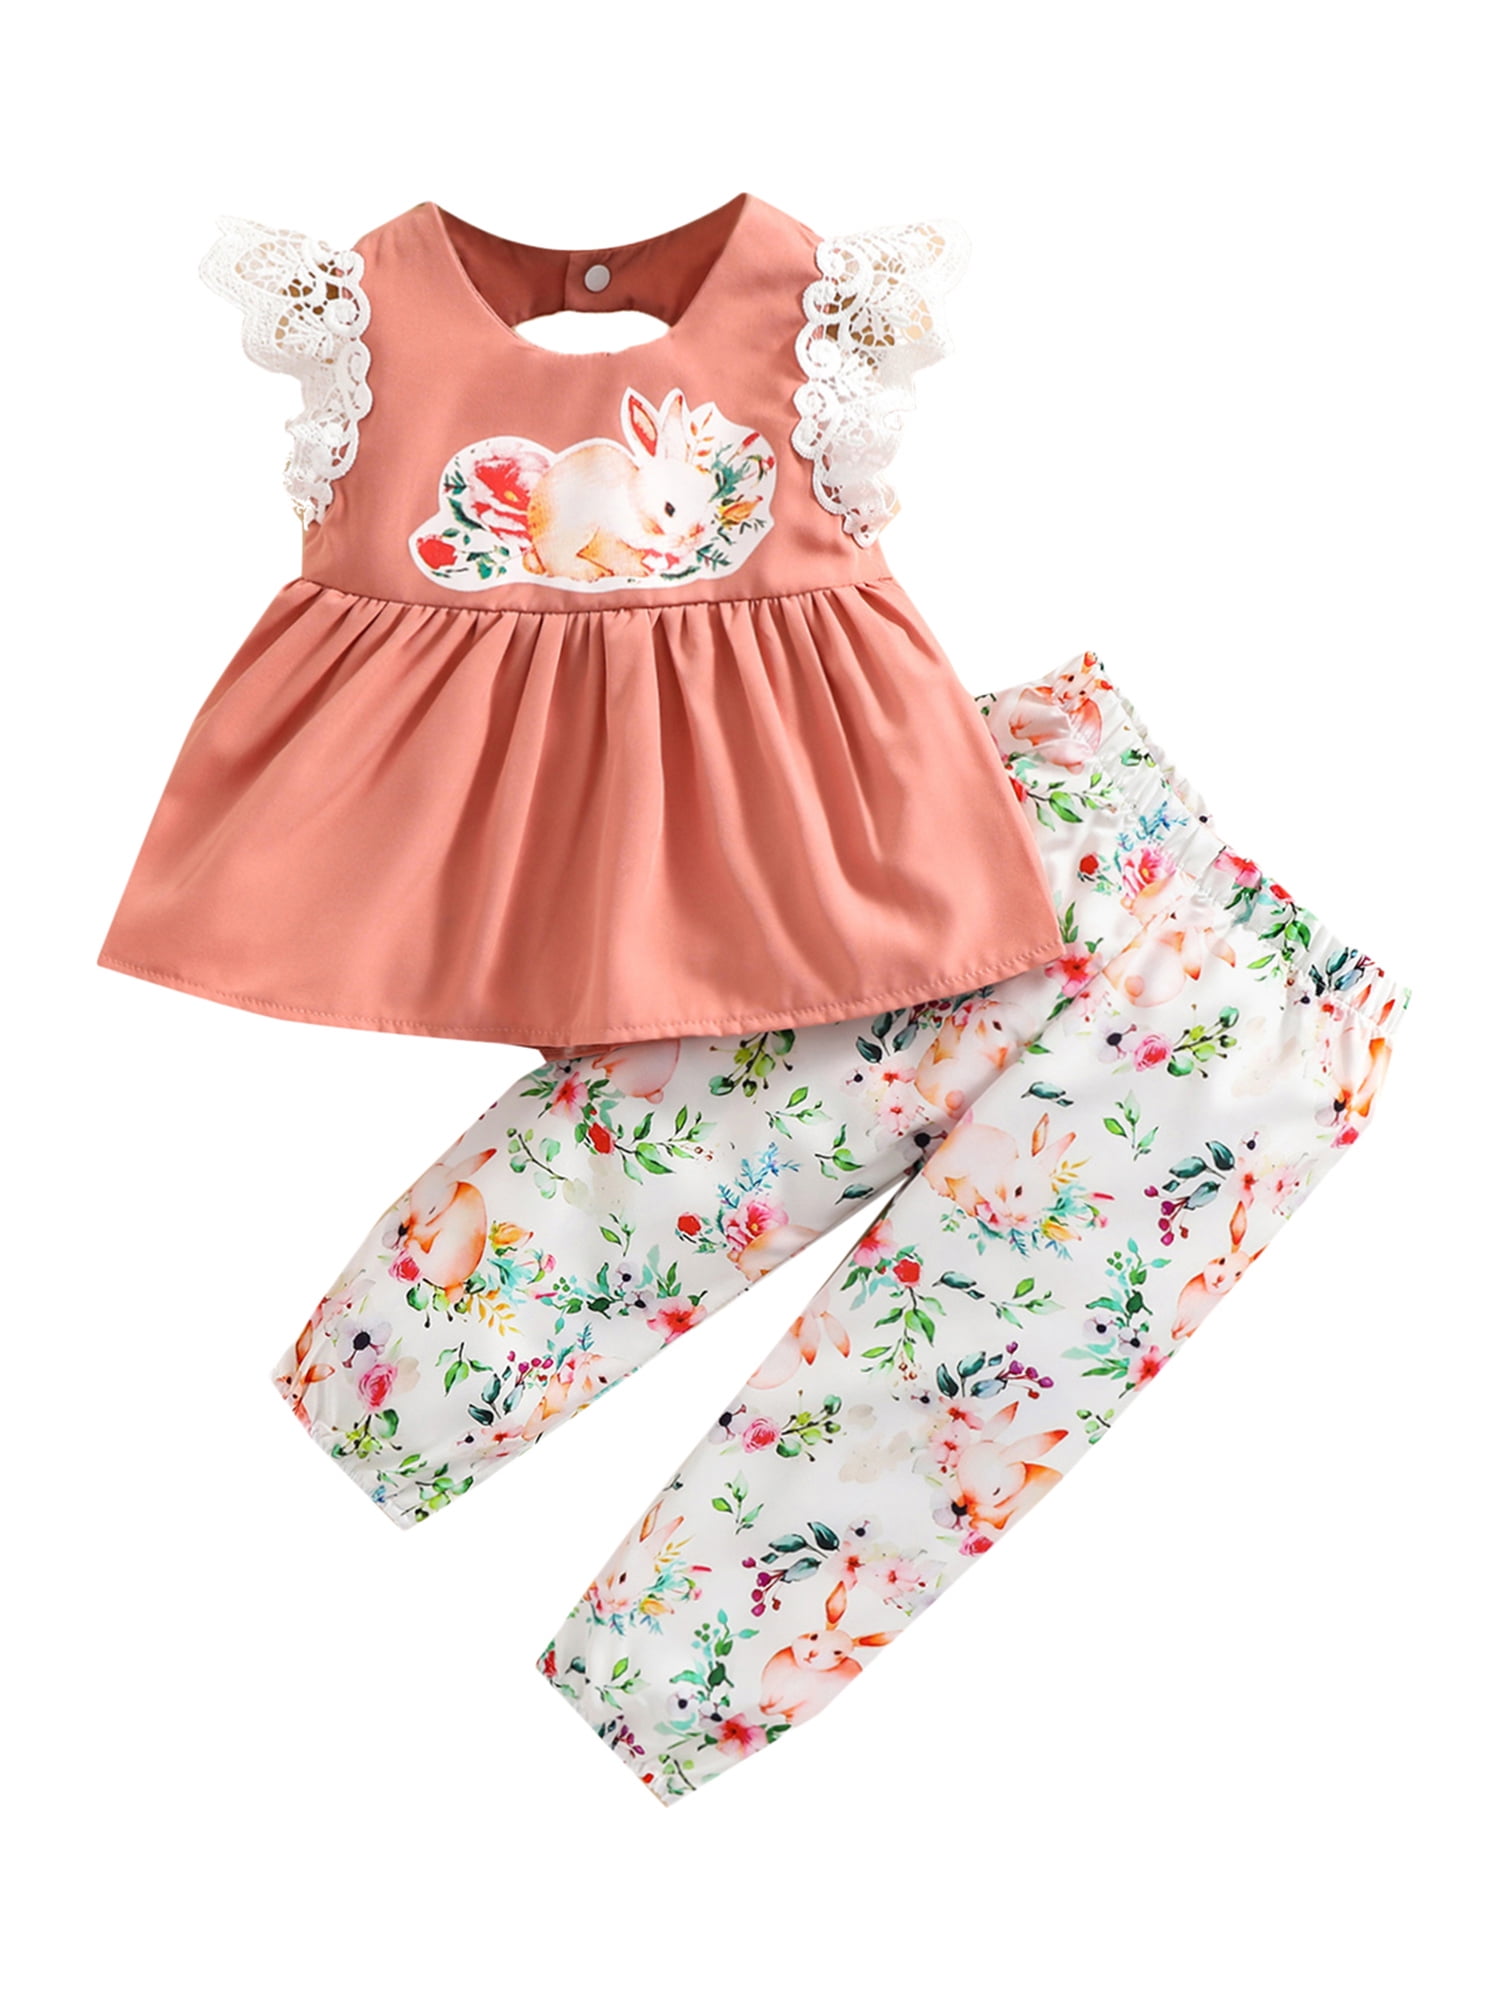 Toddler Kids Baby Girl Easter Clothes Floral Halter Sleeveless Tops Shorts 2Pcs Bunny Outfits